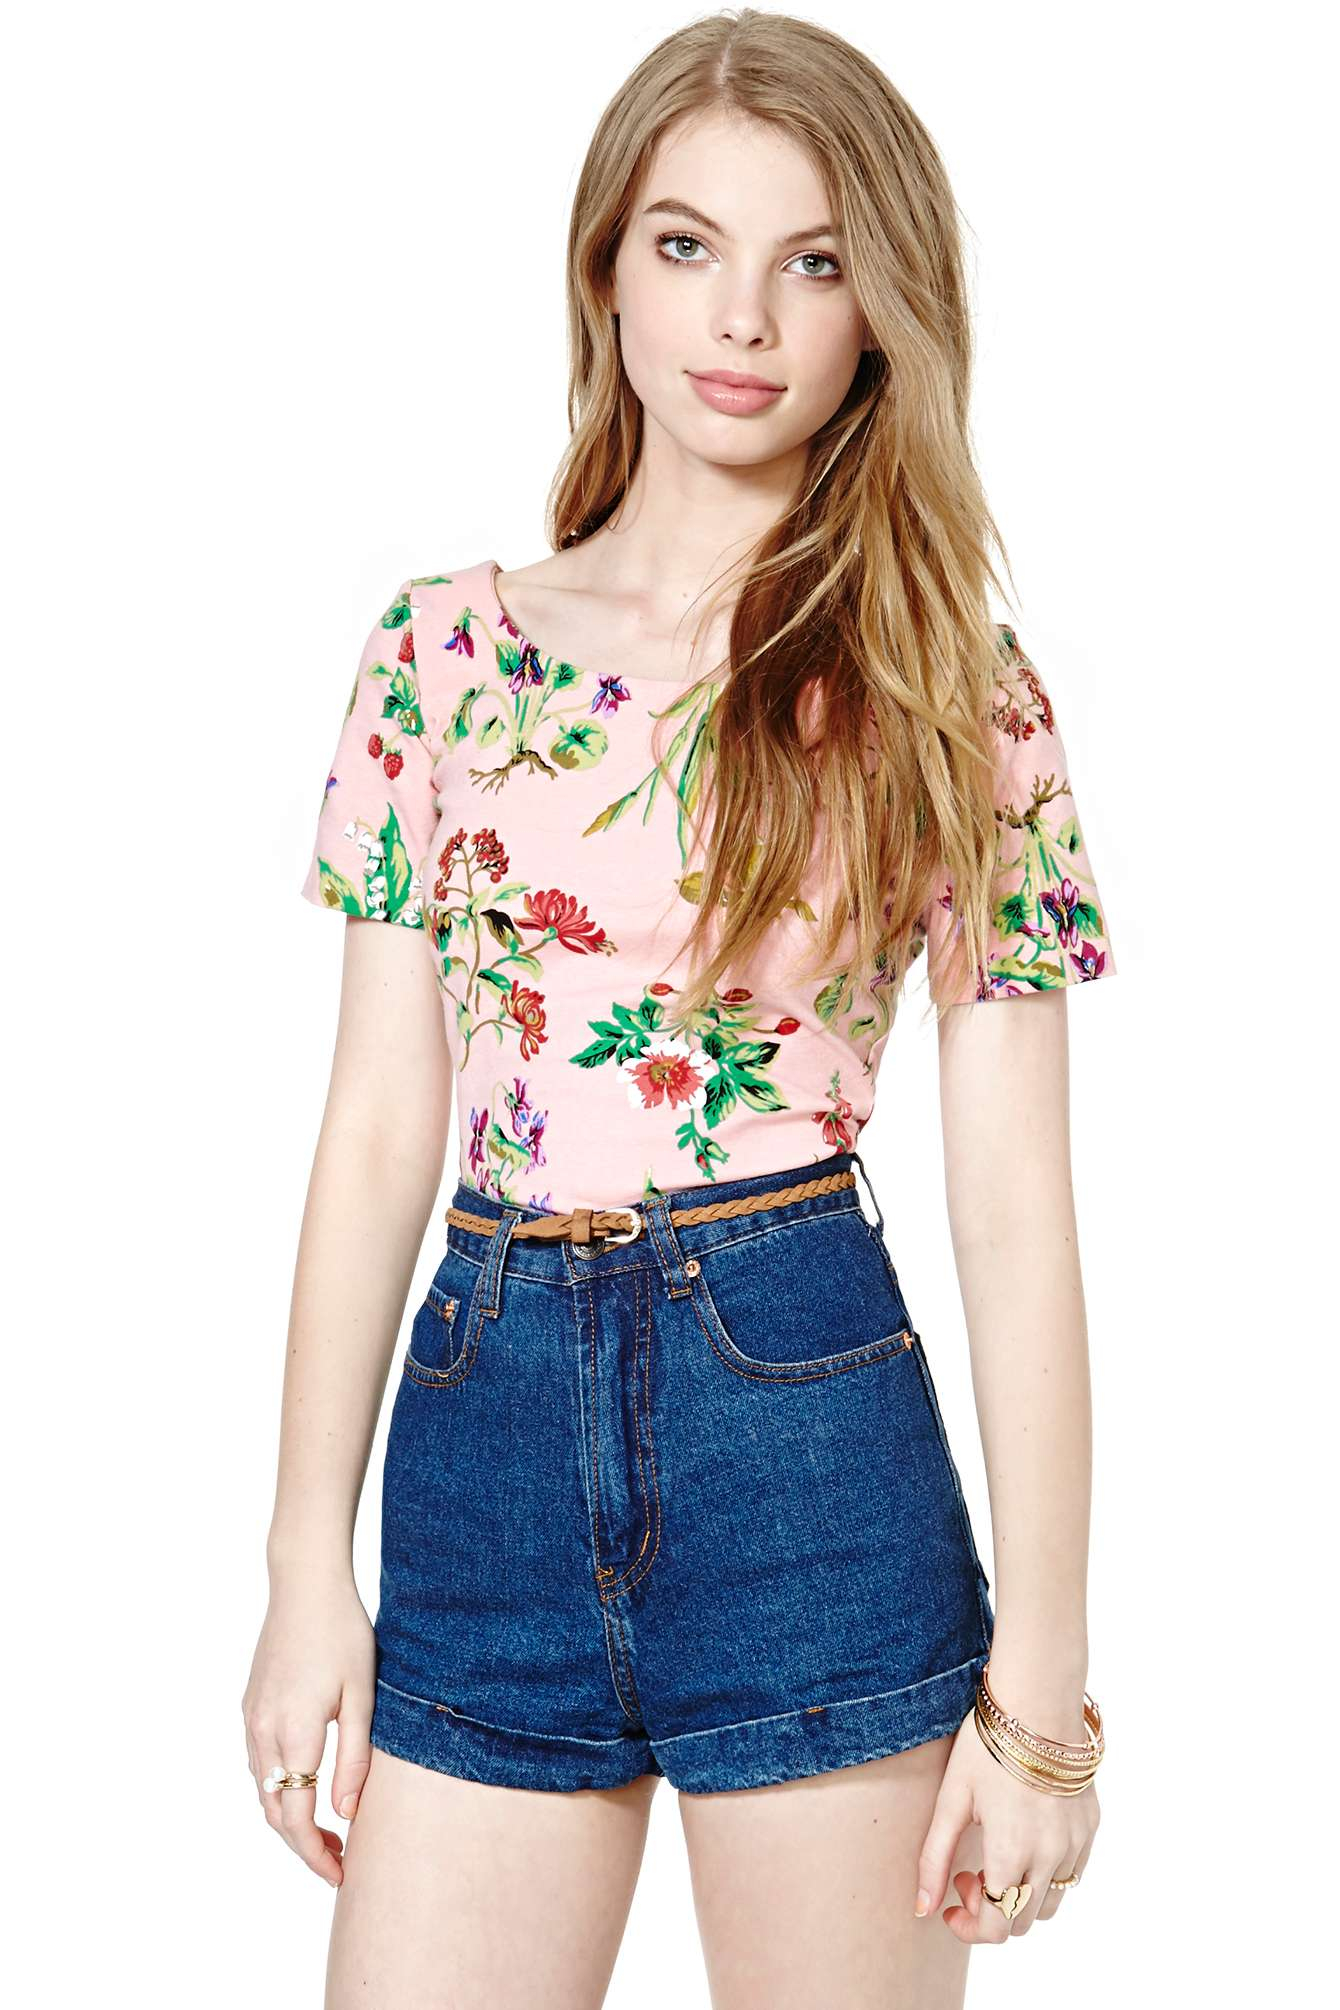 Lyst - Betsey Johnson Wild Strawberry Top in Pink